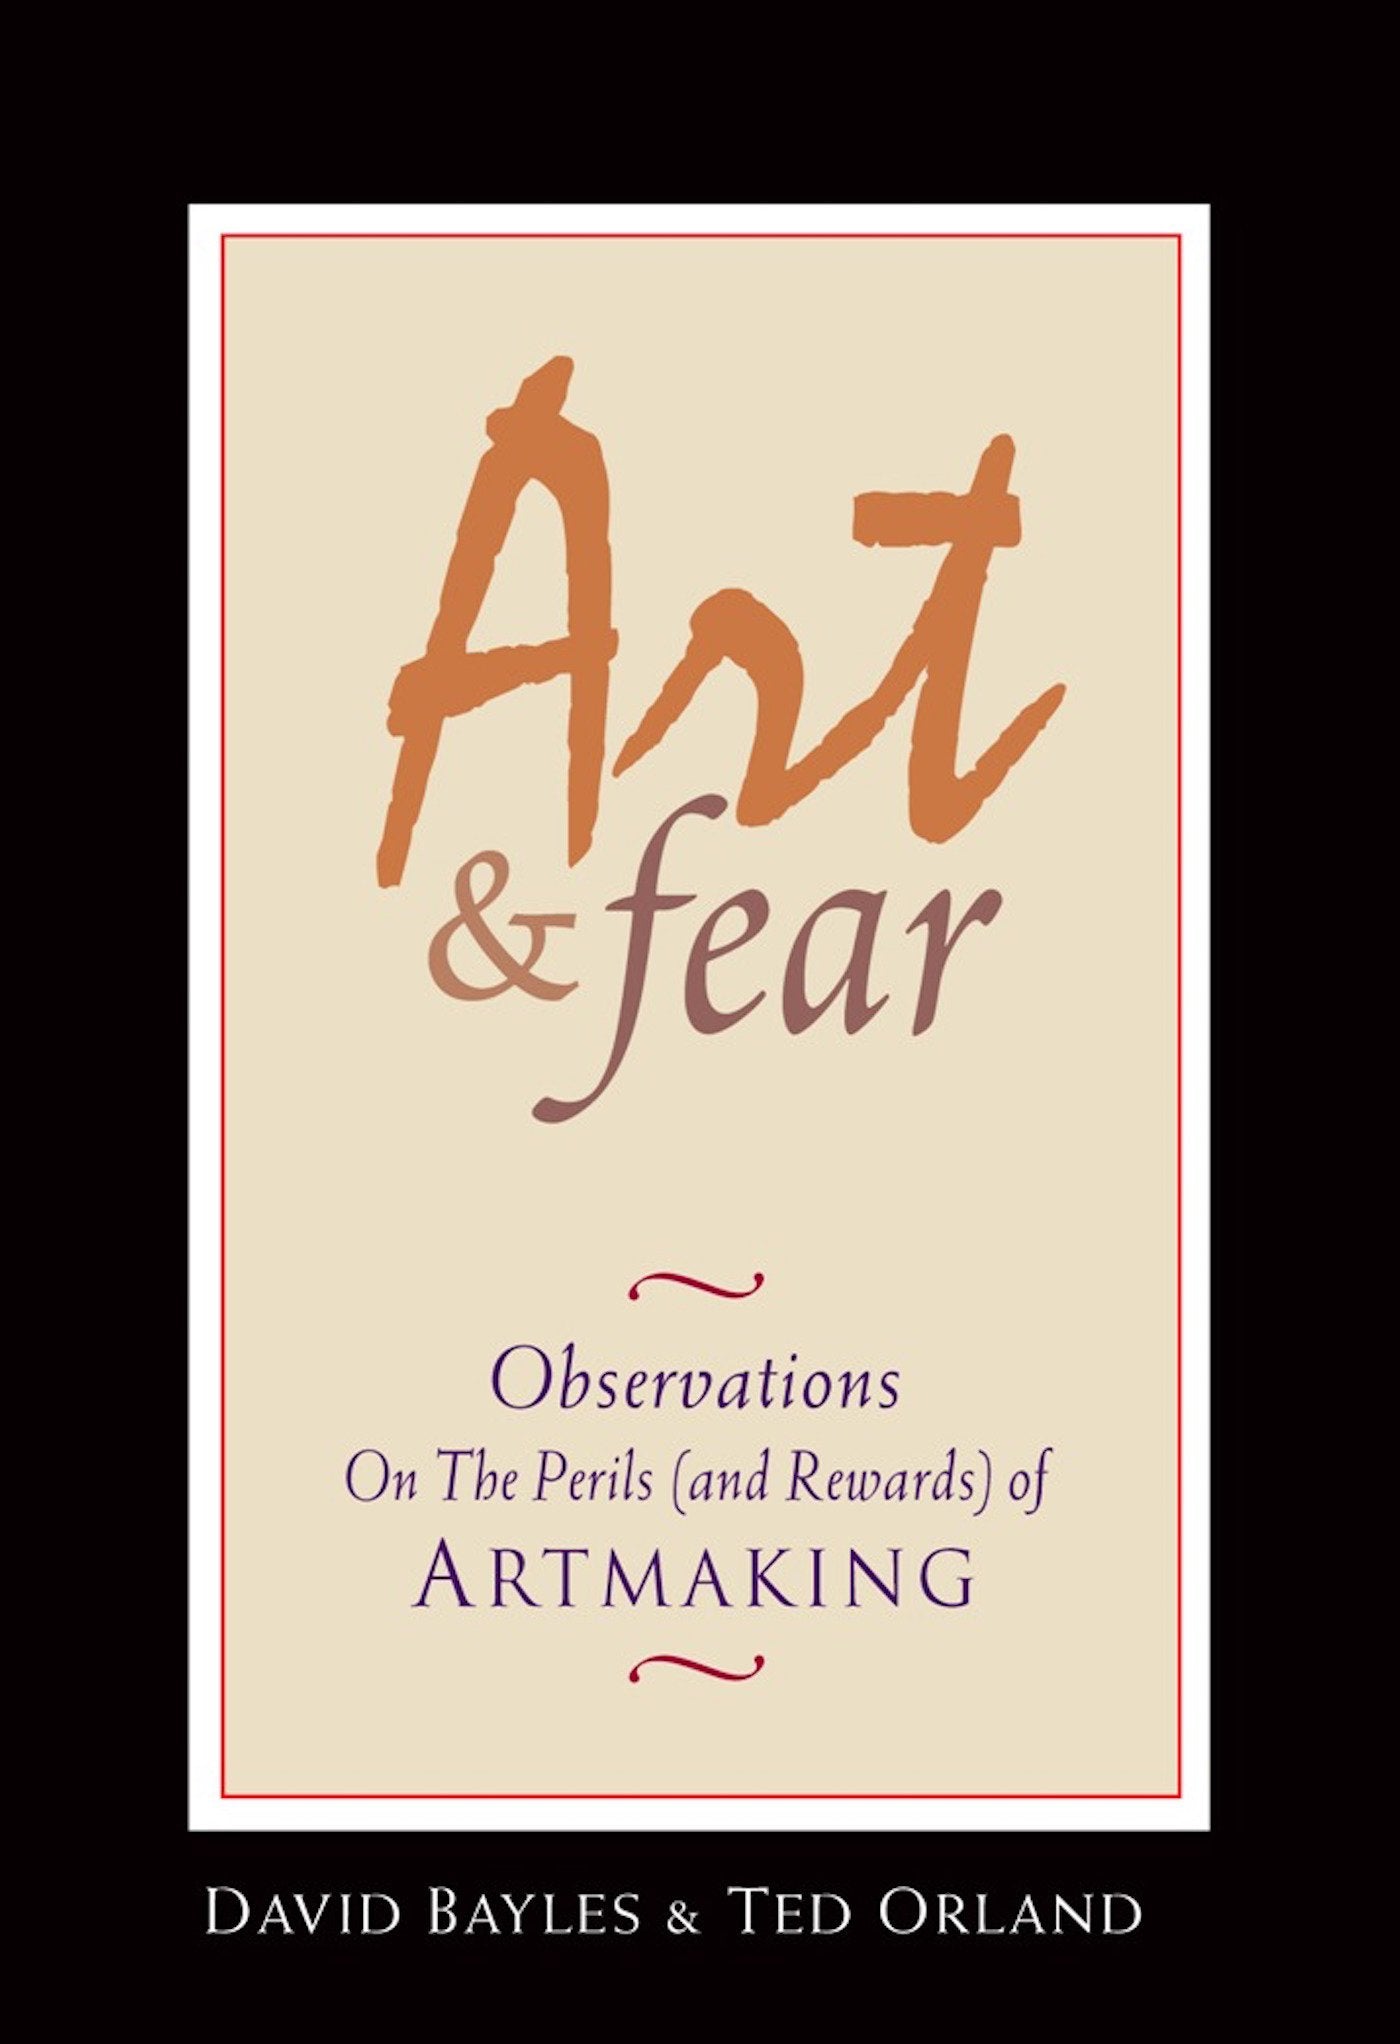 Art & Fear : Observations on the Perils (and Rewards) of Artmaking by David Bayles & Ted Orland